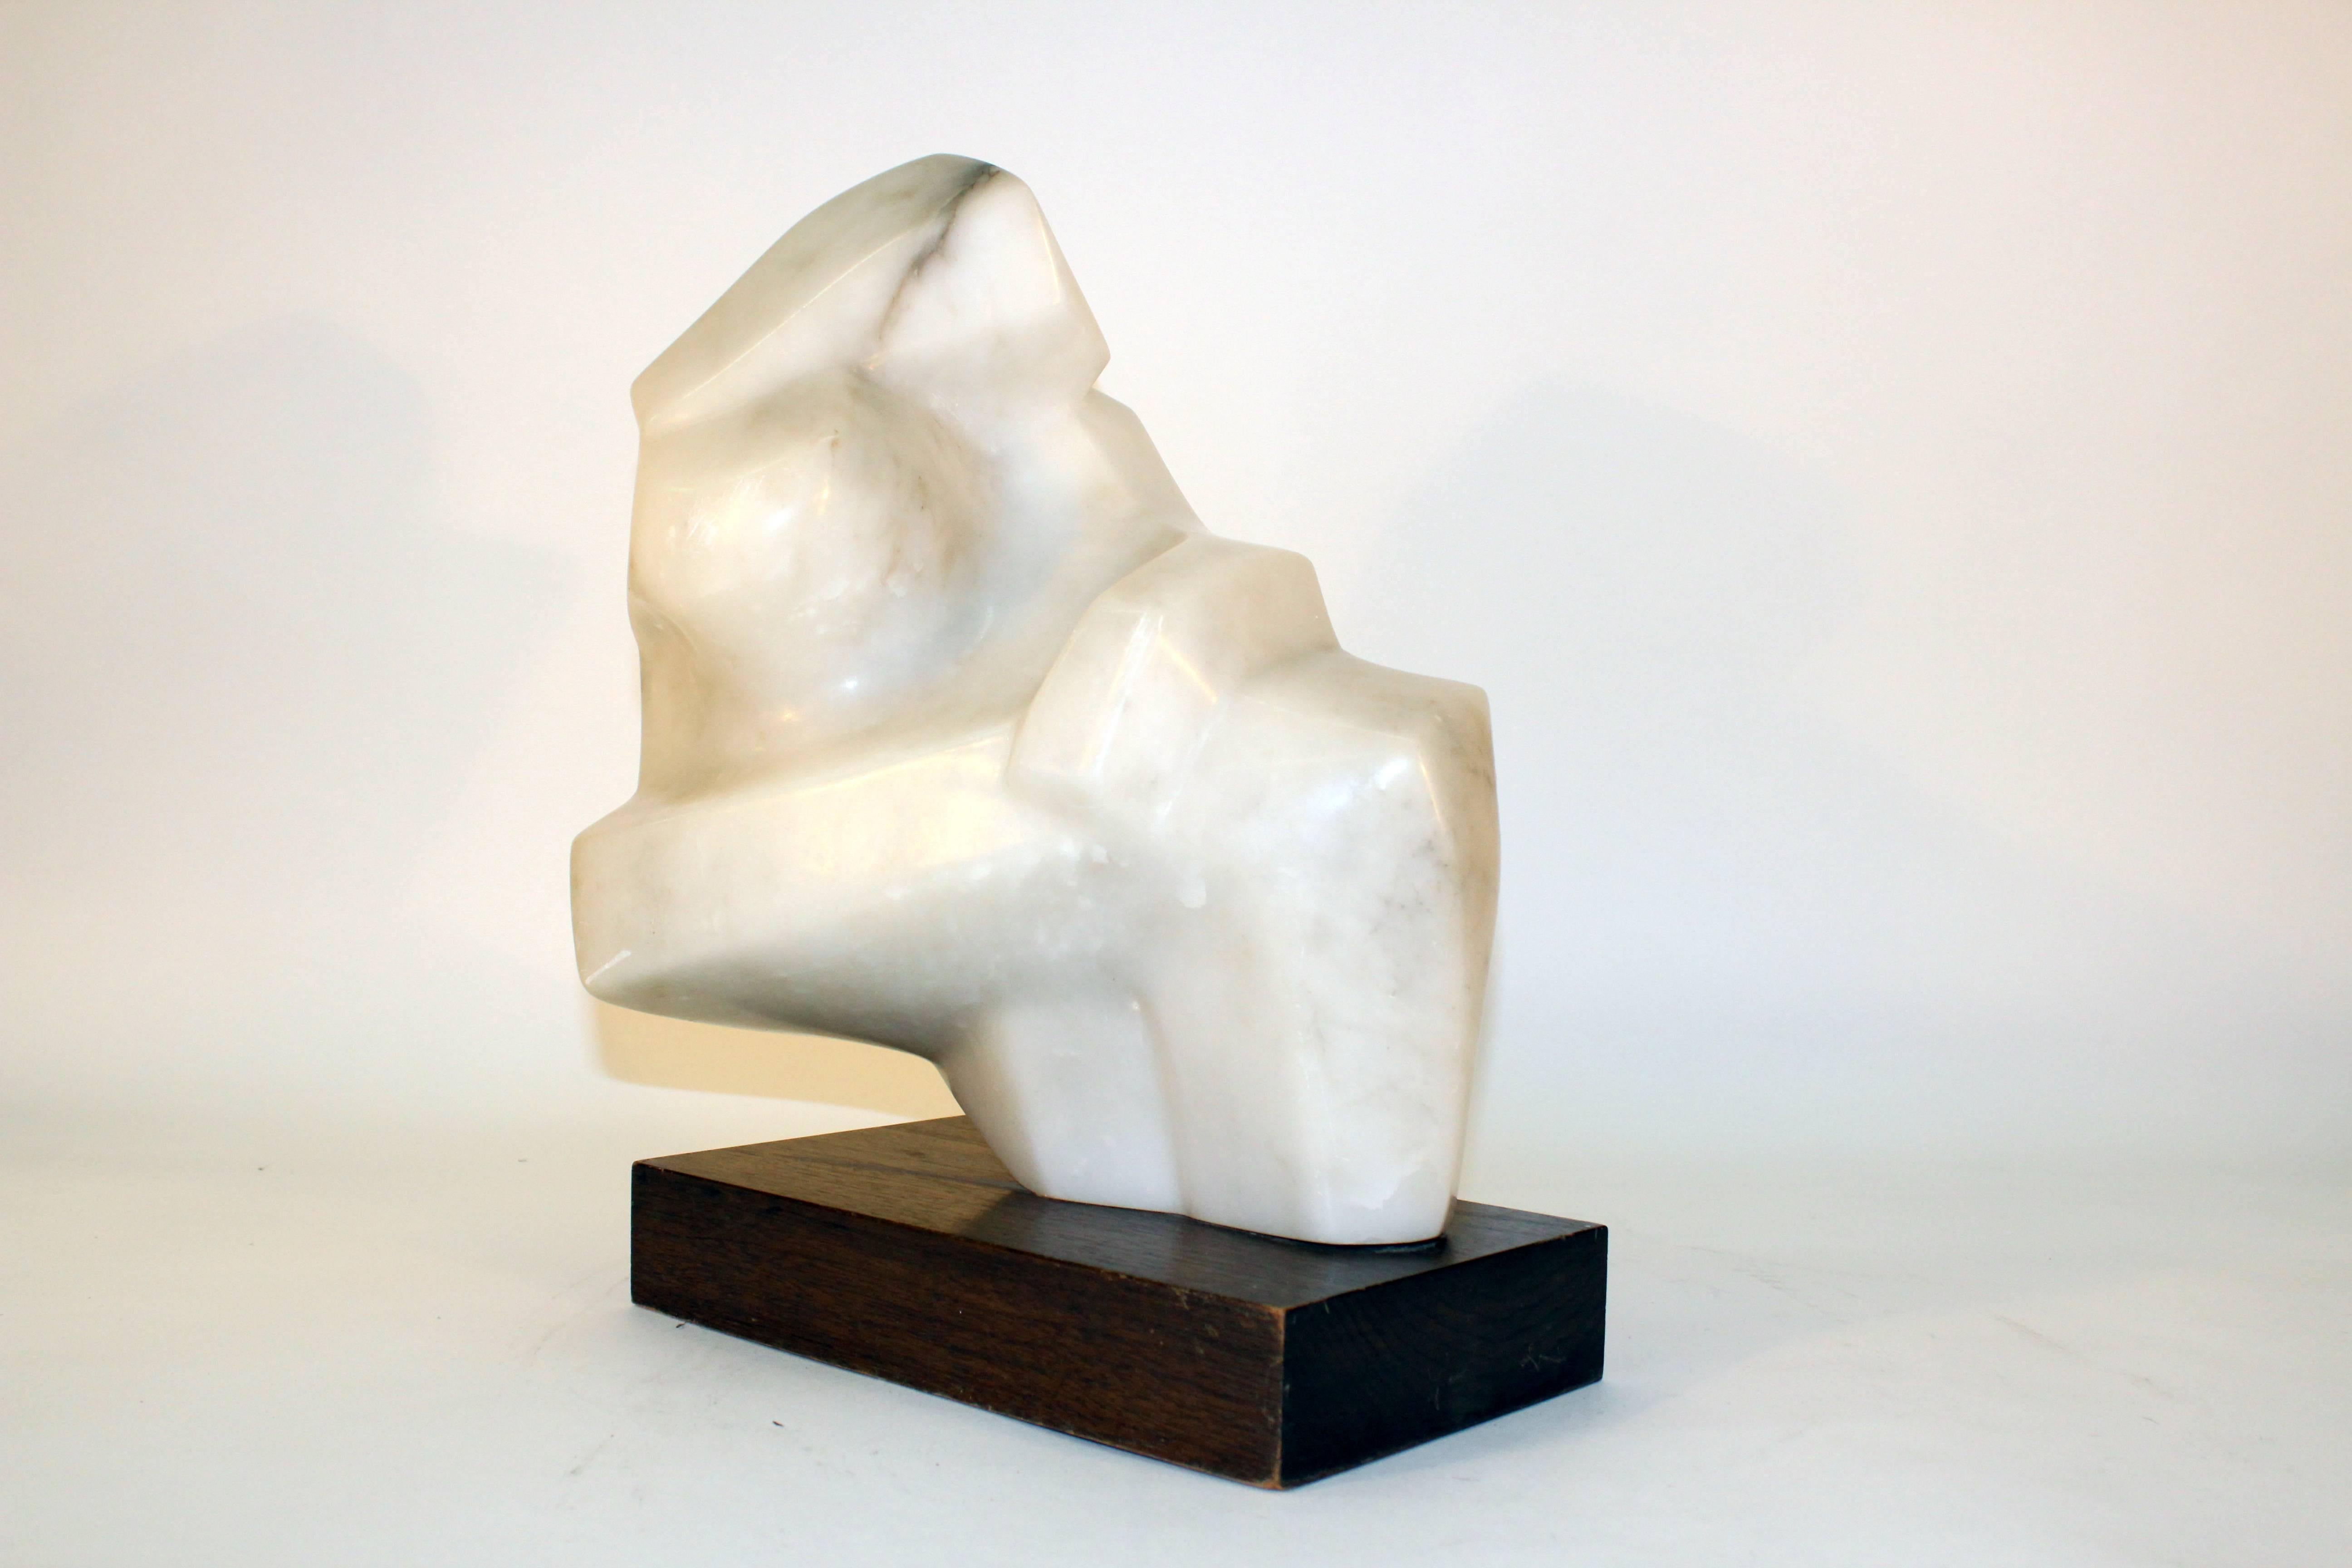 An abstract sculpture carved in alabaster, mounted on a dark wood removable base. The sculpture remains in good condition with some scratches on the base and stone appropriate to use.

110168